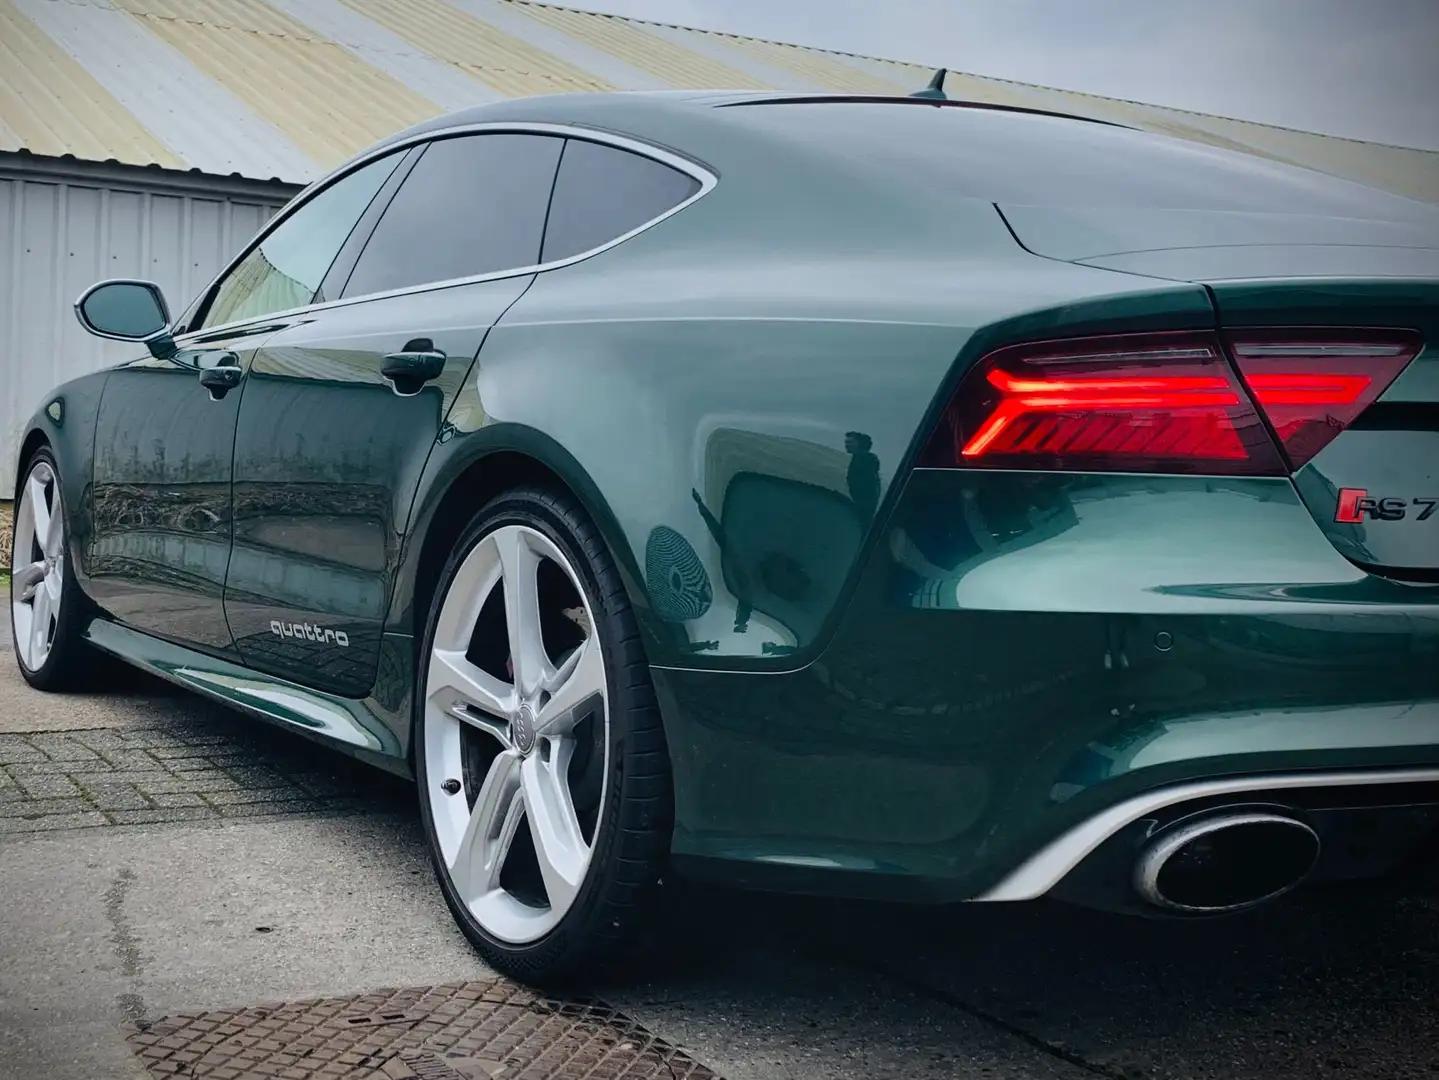 Audi RS7 Verdant Green - Audi Exclusive - from collector Groen - 2